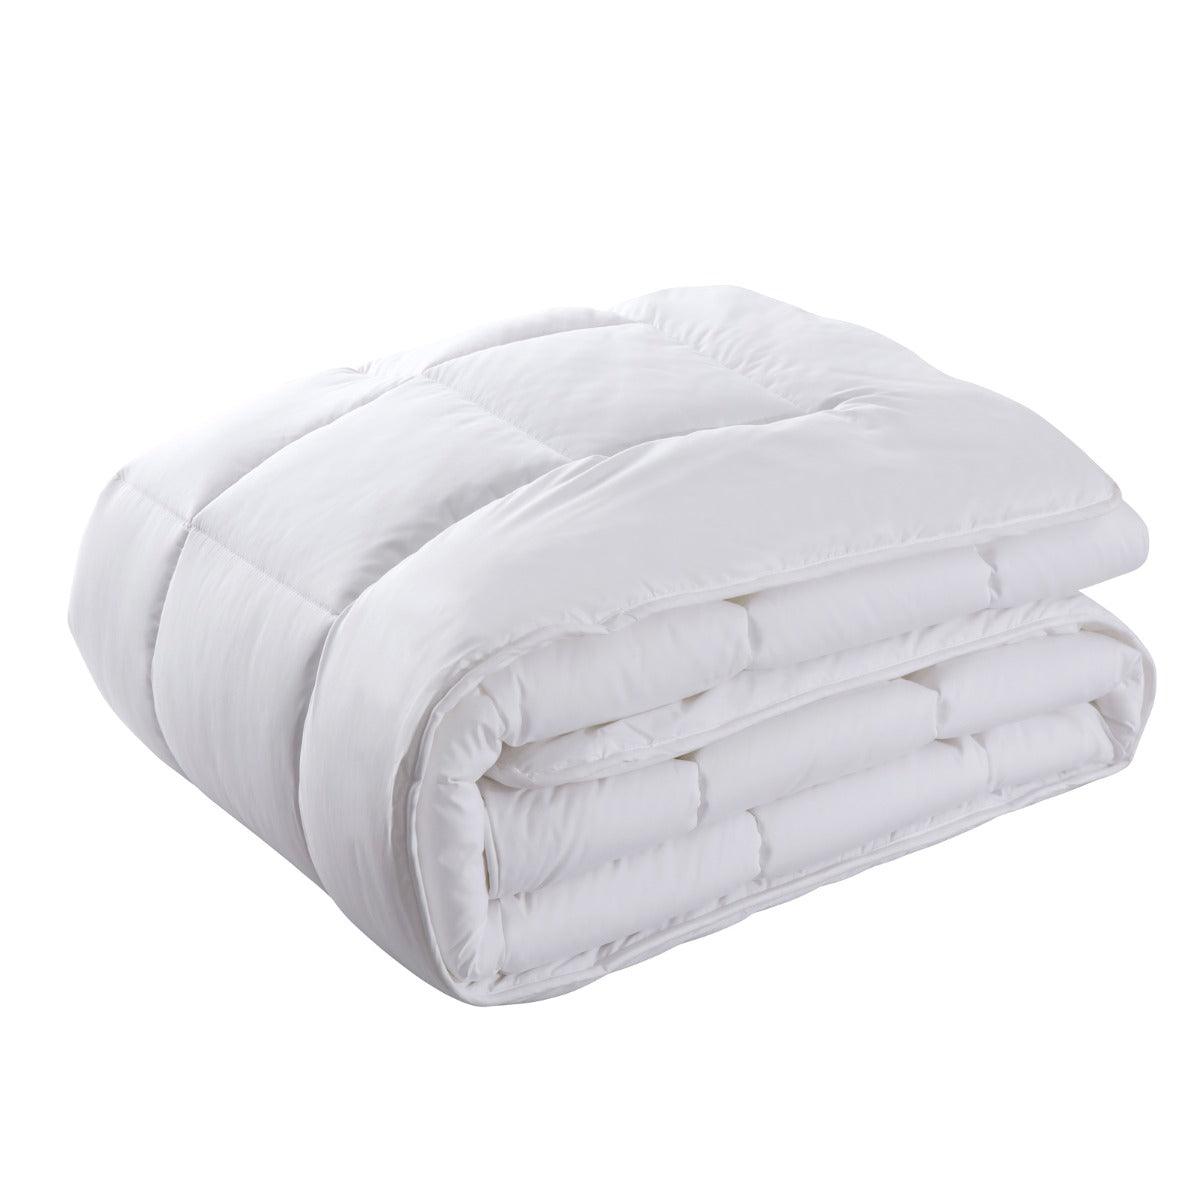 Royal Comfort 260GSM Deluxe Eco-Silk Touch Quilt 100% Cotton Cover - Double - White